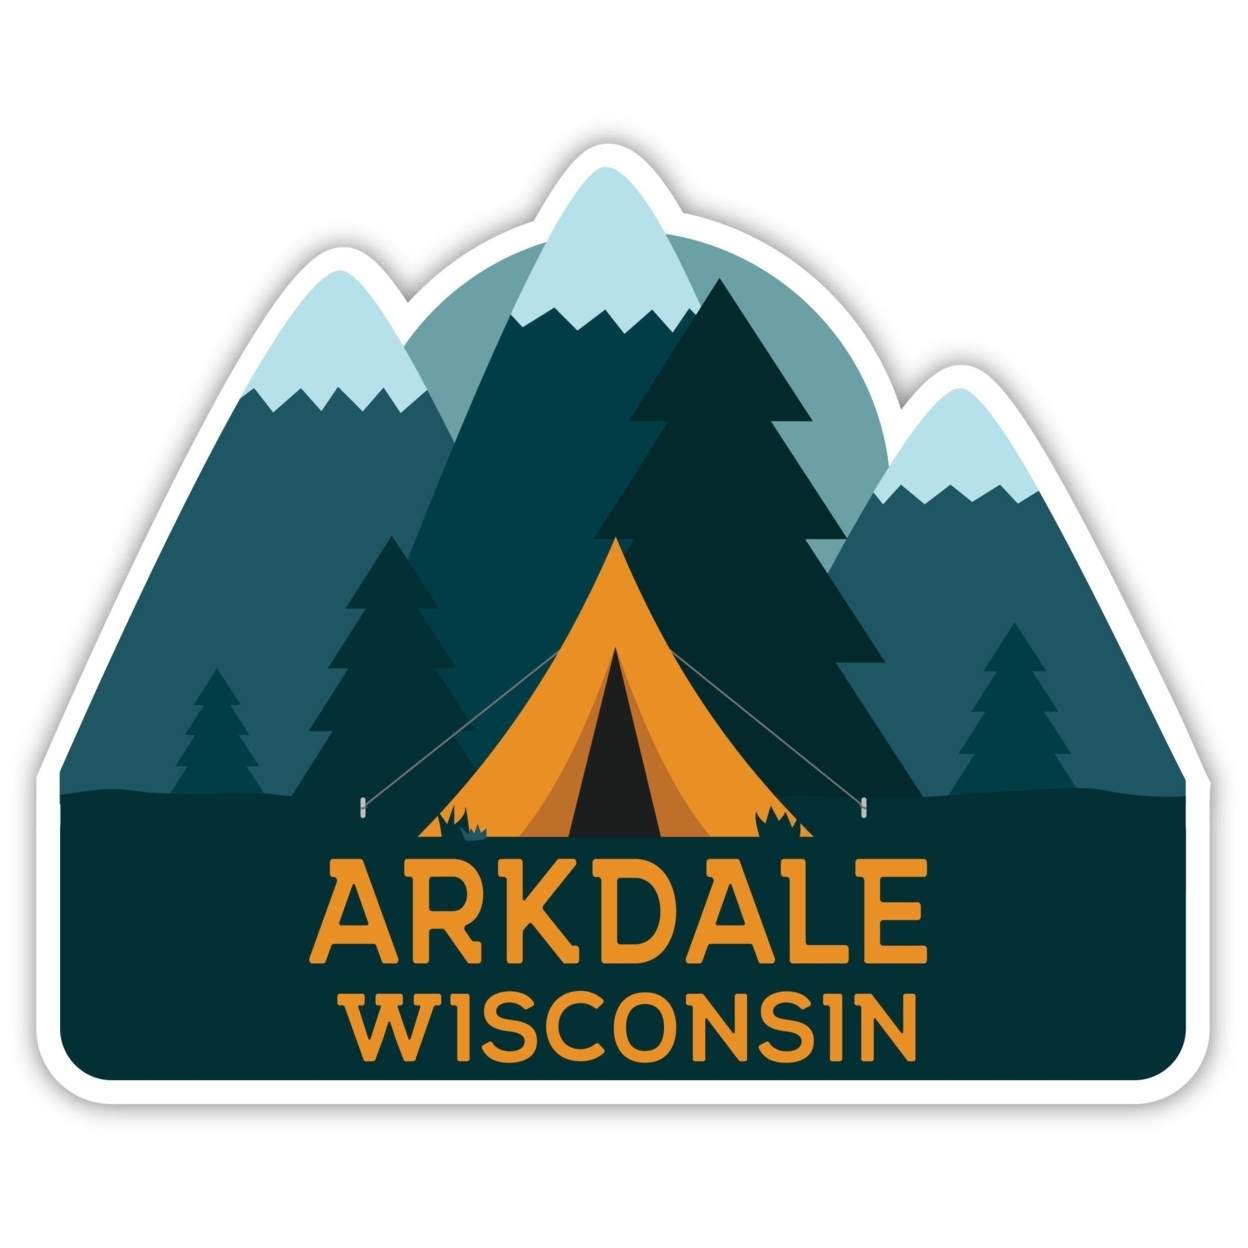 Arkdale Wisconsin Souvenir Decorative Stickers (Choose Theme And Size) - Single Unit, 12-Inch, Bear